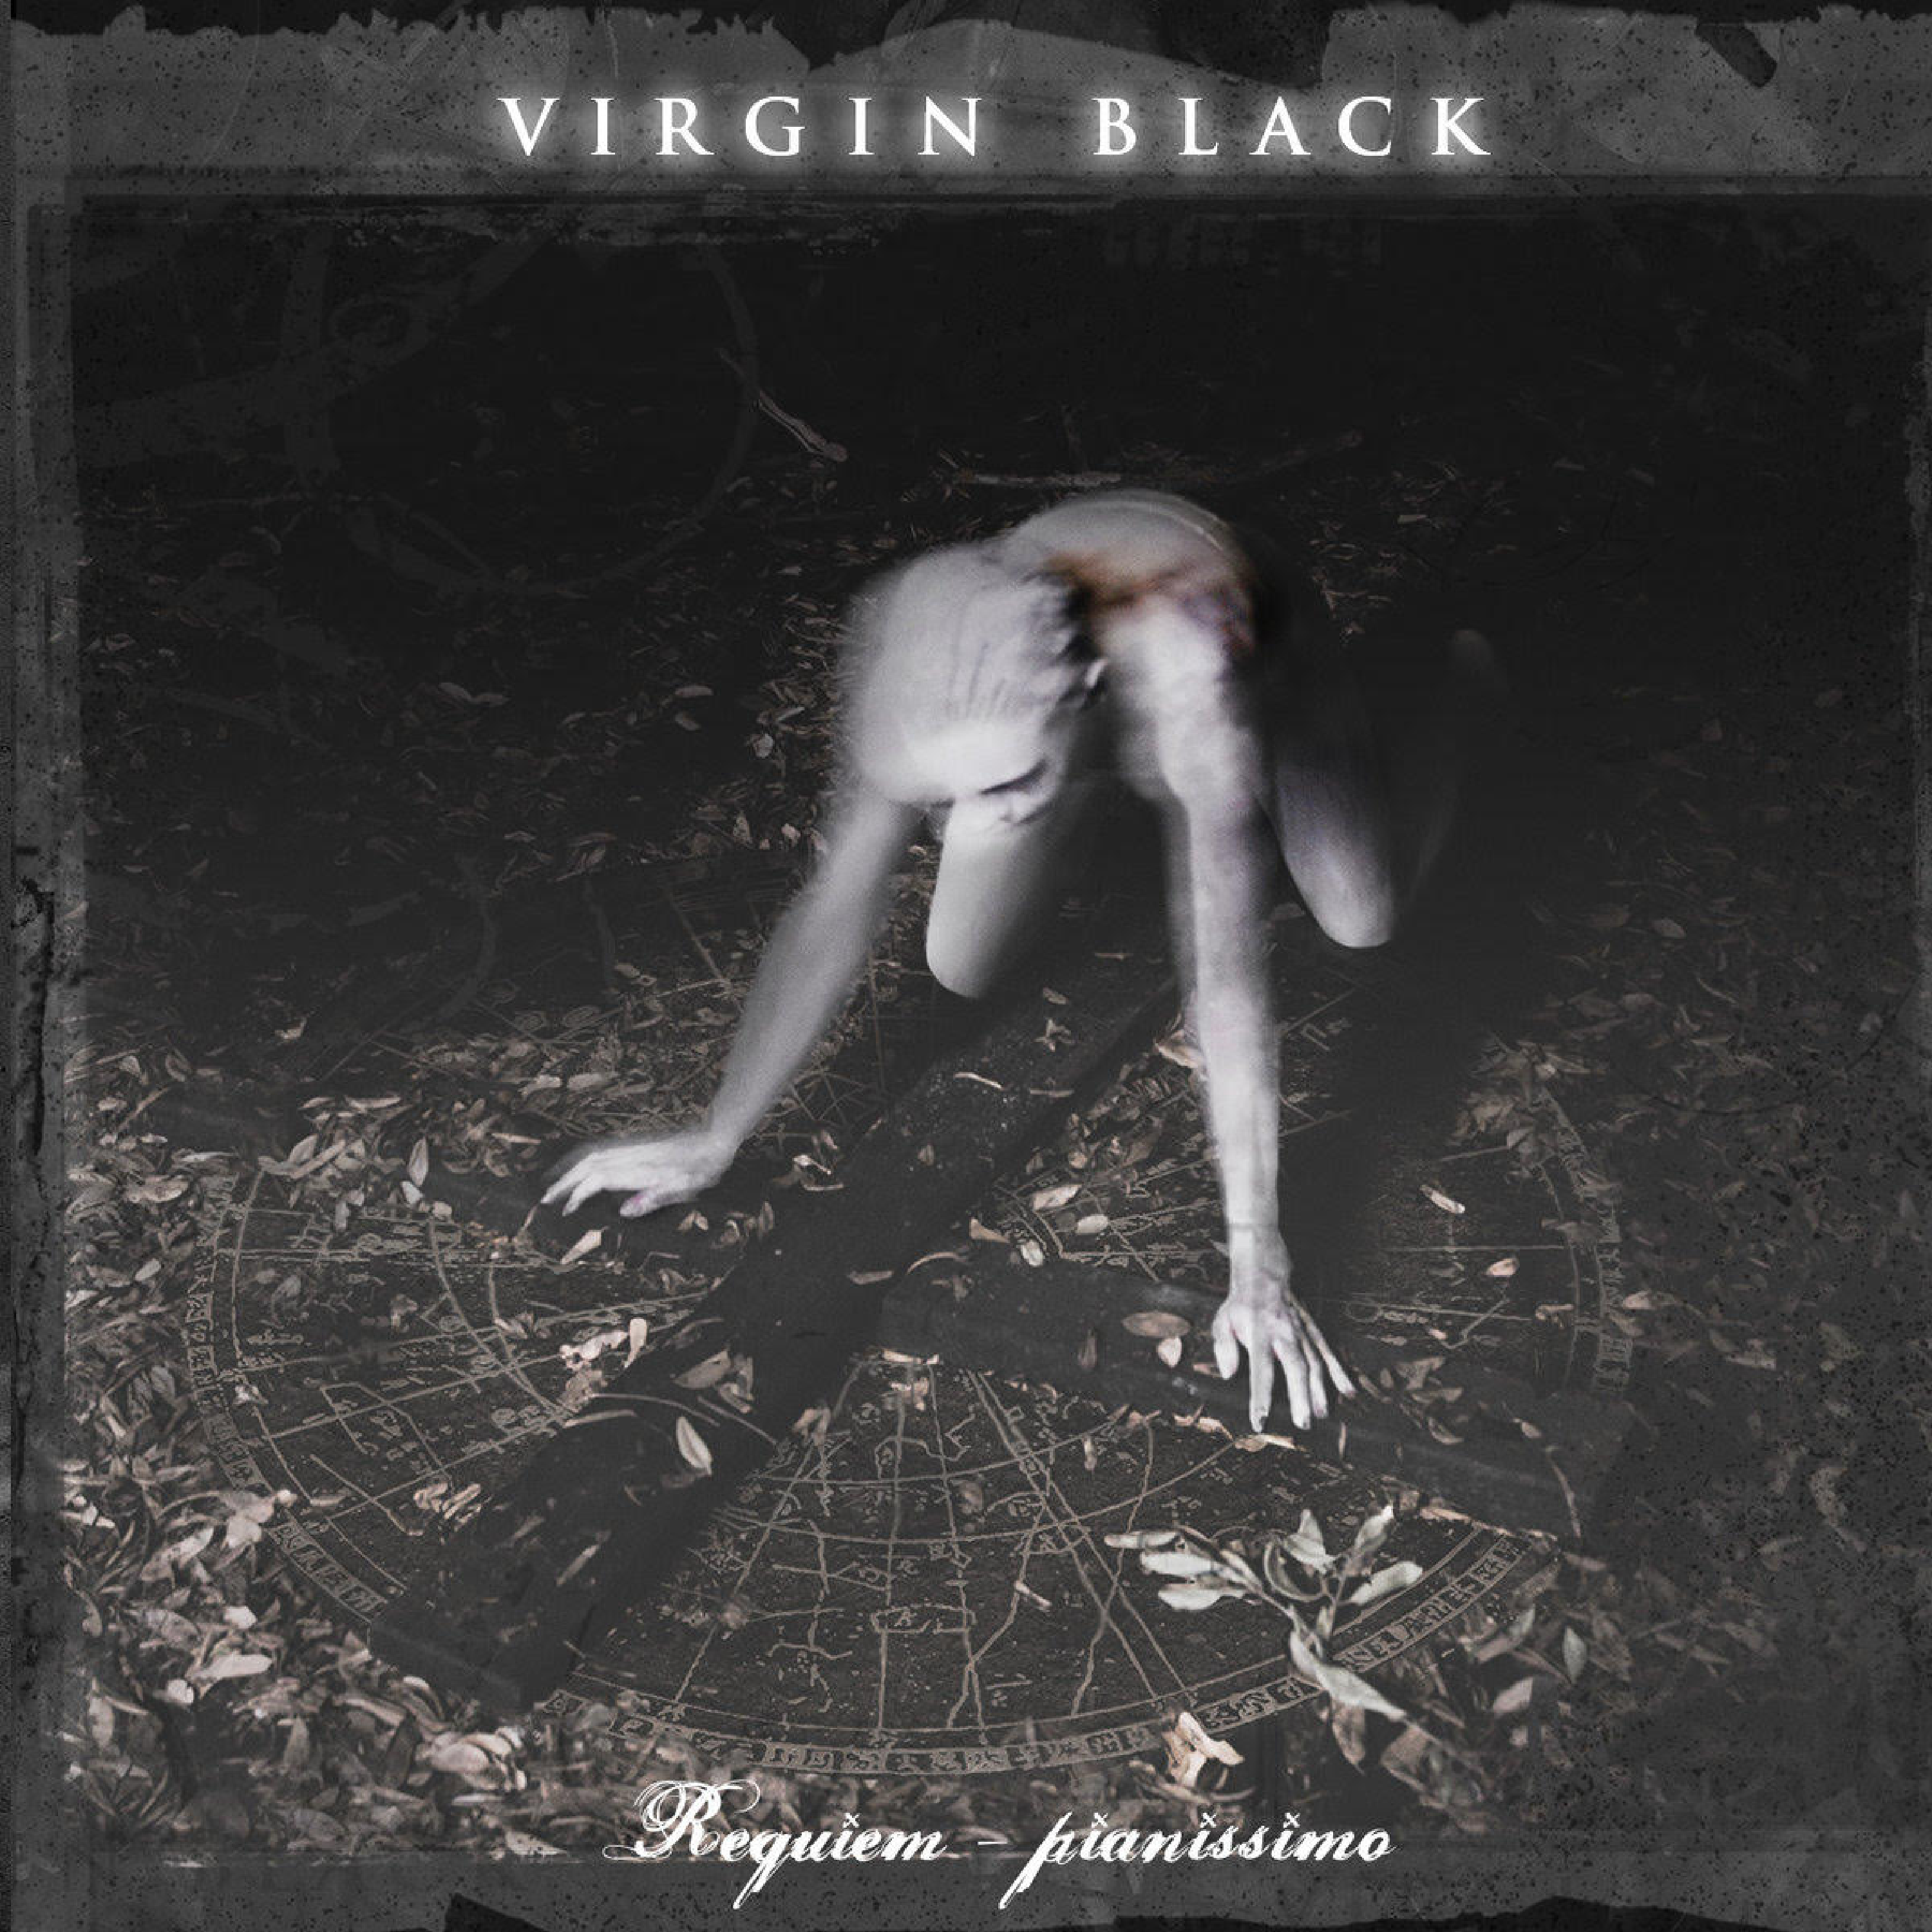 Virgin Black Unleashes Epic “Requiem” Trilogy to Streaming Services